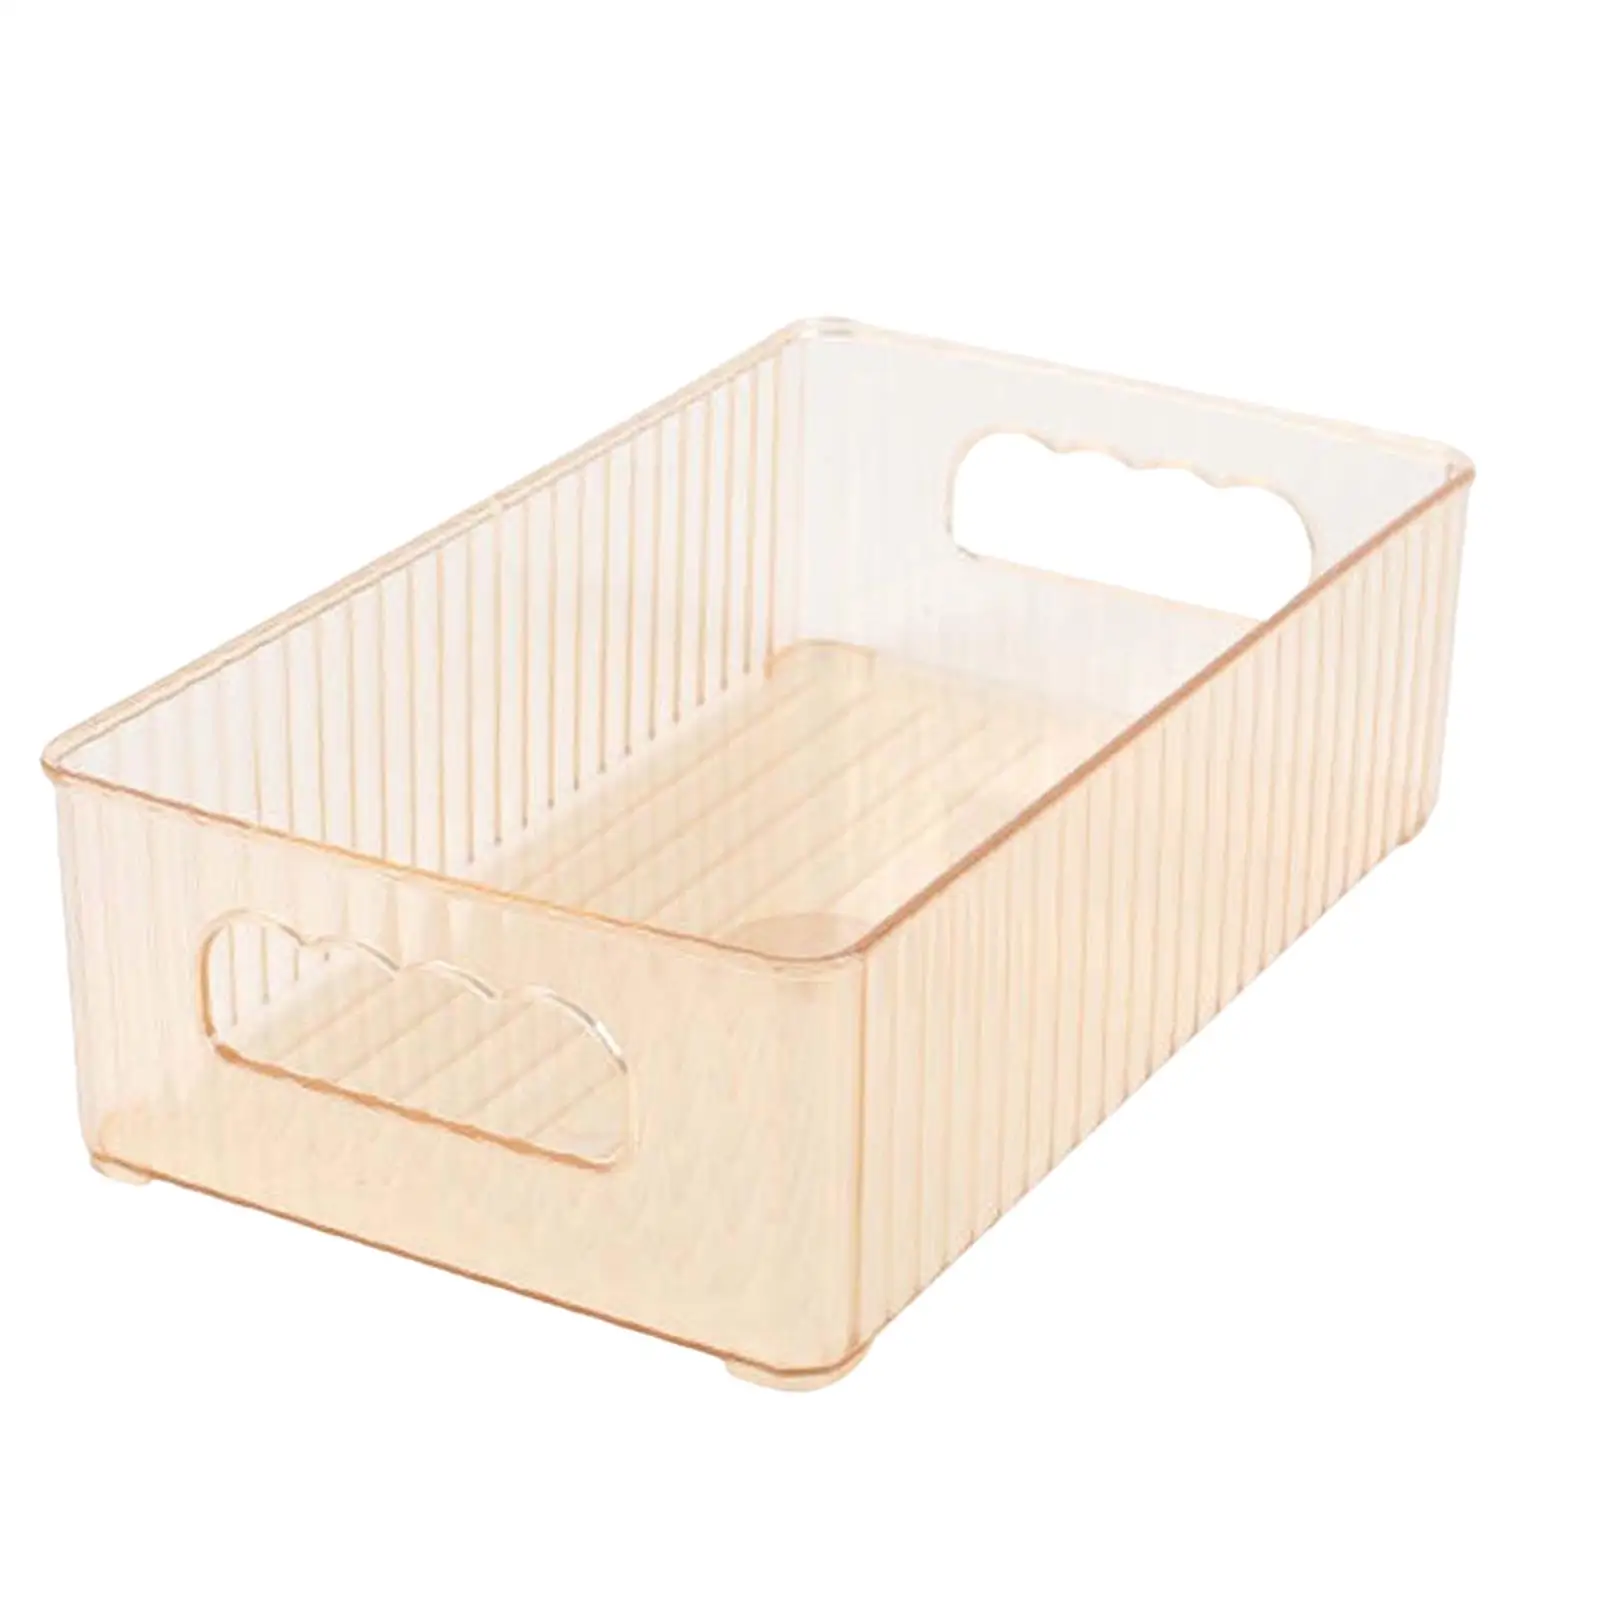 Storage Bin Decorative Stackable Closet Organizer with Handle Basket Container Pantry Shelf for Office Cabinet Kitchen Home